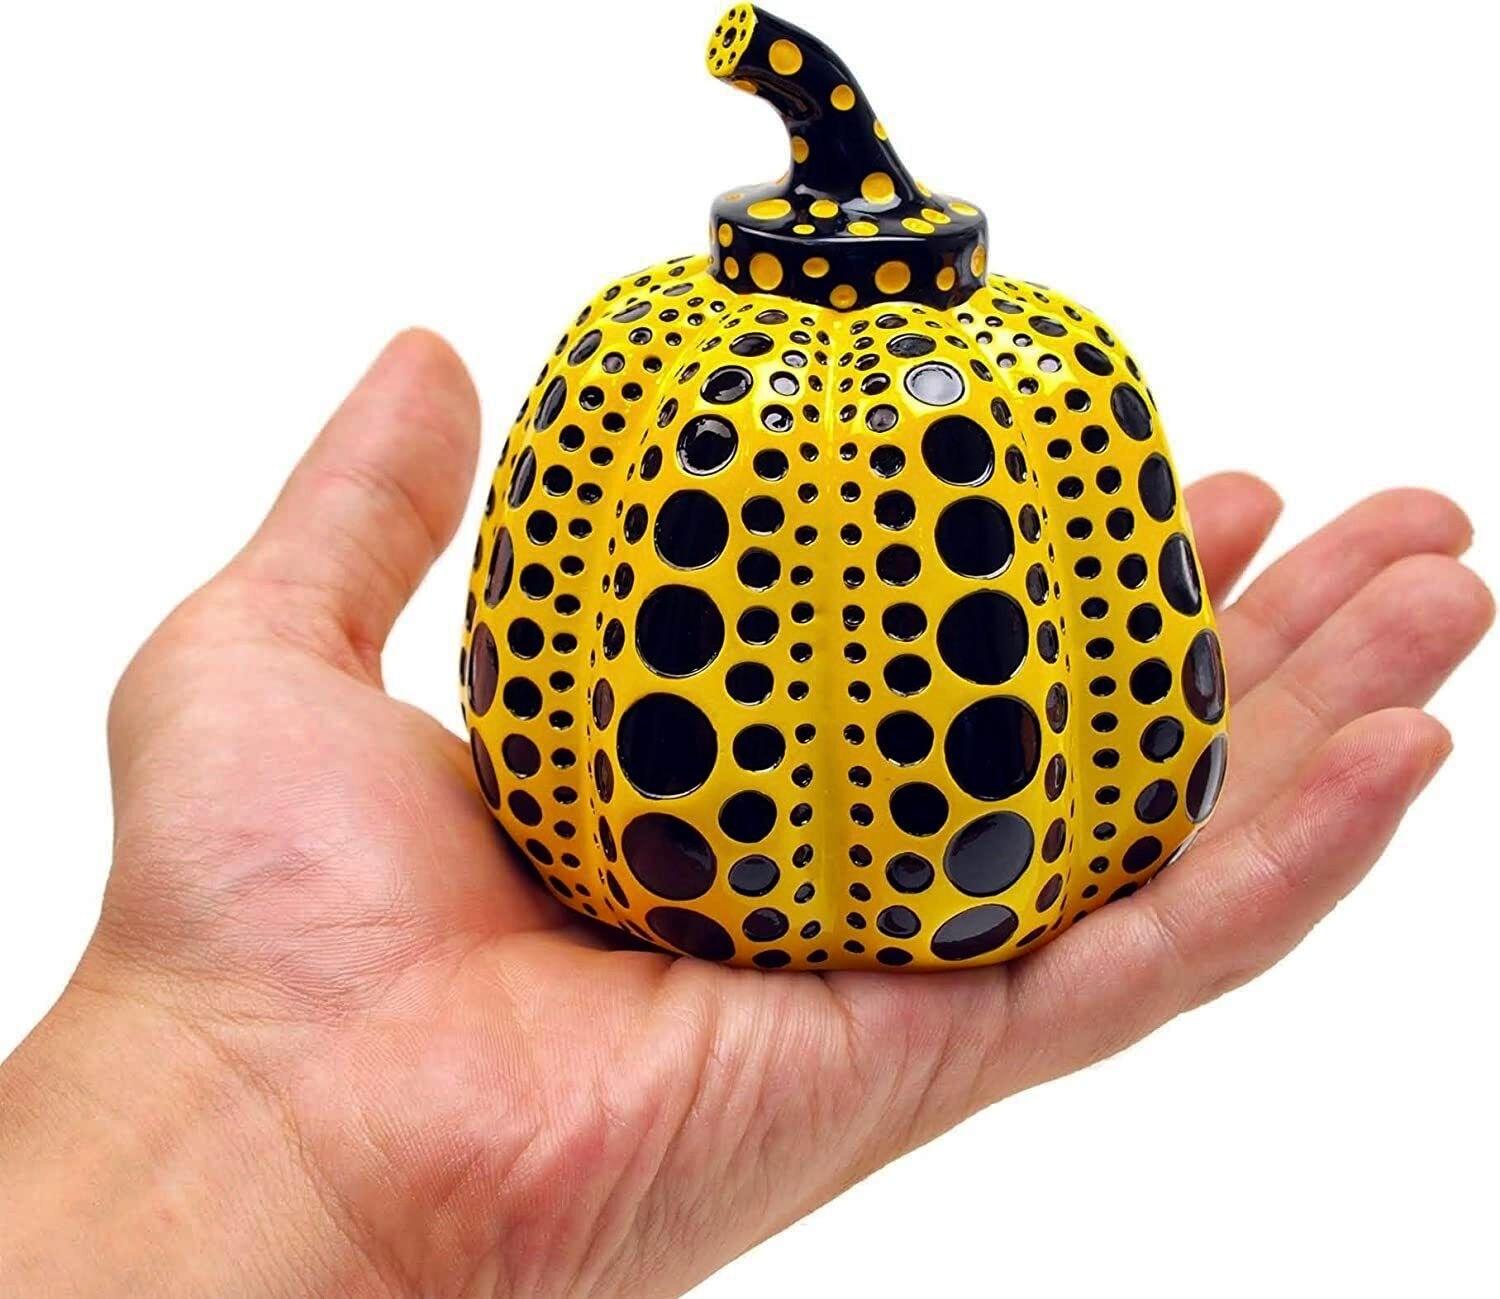 Artist: Yayoi Kusama (1929)
Title: Pumpkin (Yellow & Black)
Year: circa 2013-2020
Medium: Painted Cast Resin Sculpture
Size: 4.13 x 3.35 x 3.35 inches
Condition: Excellent
Inscription: Stamped on the underside with the artist's name.
Notes: